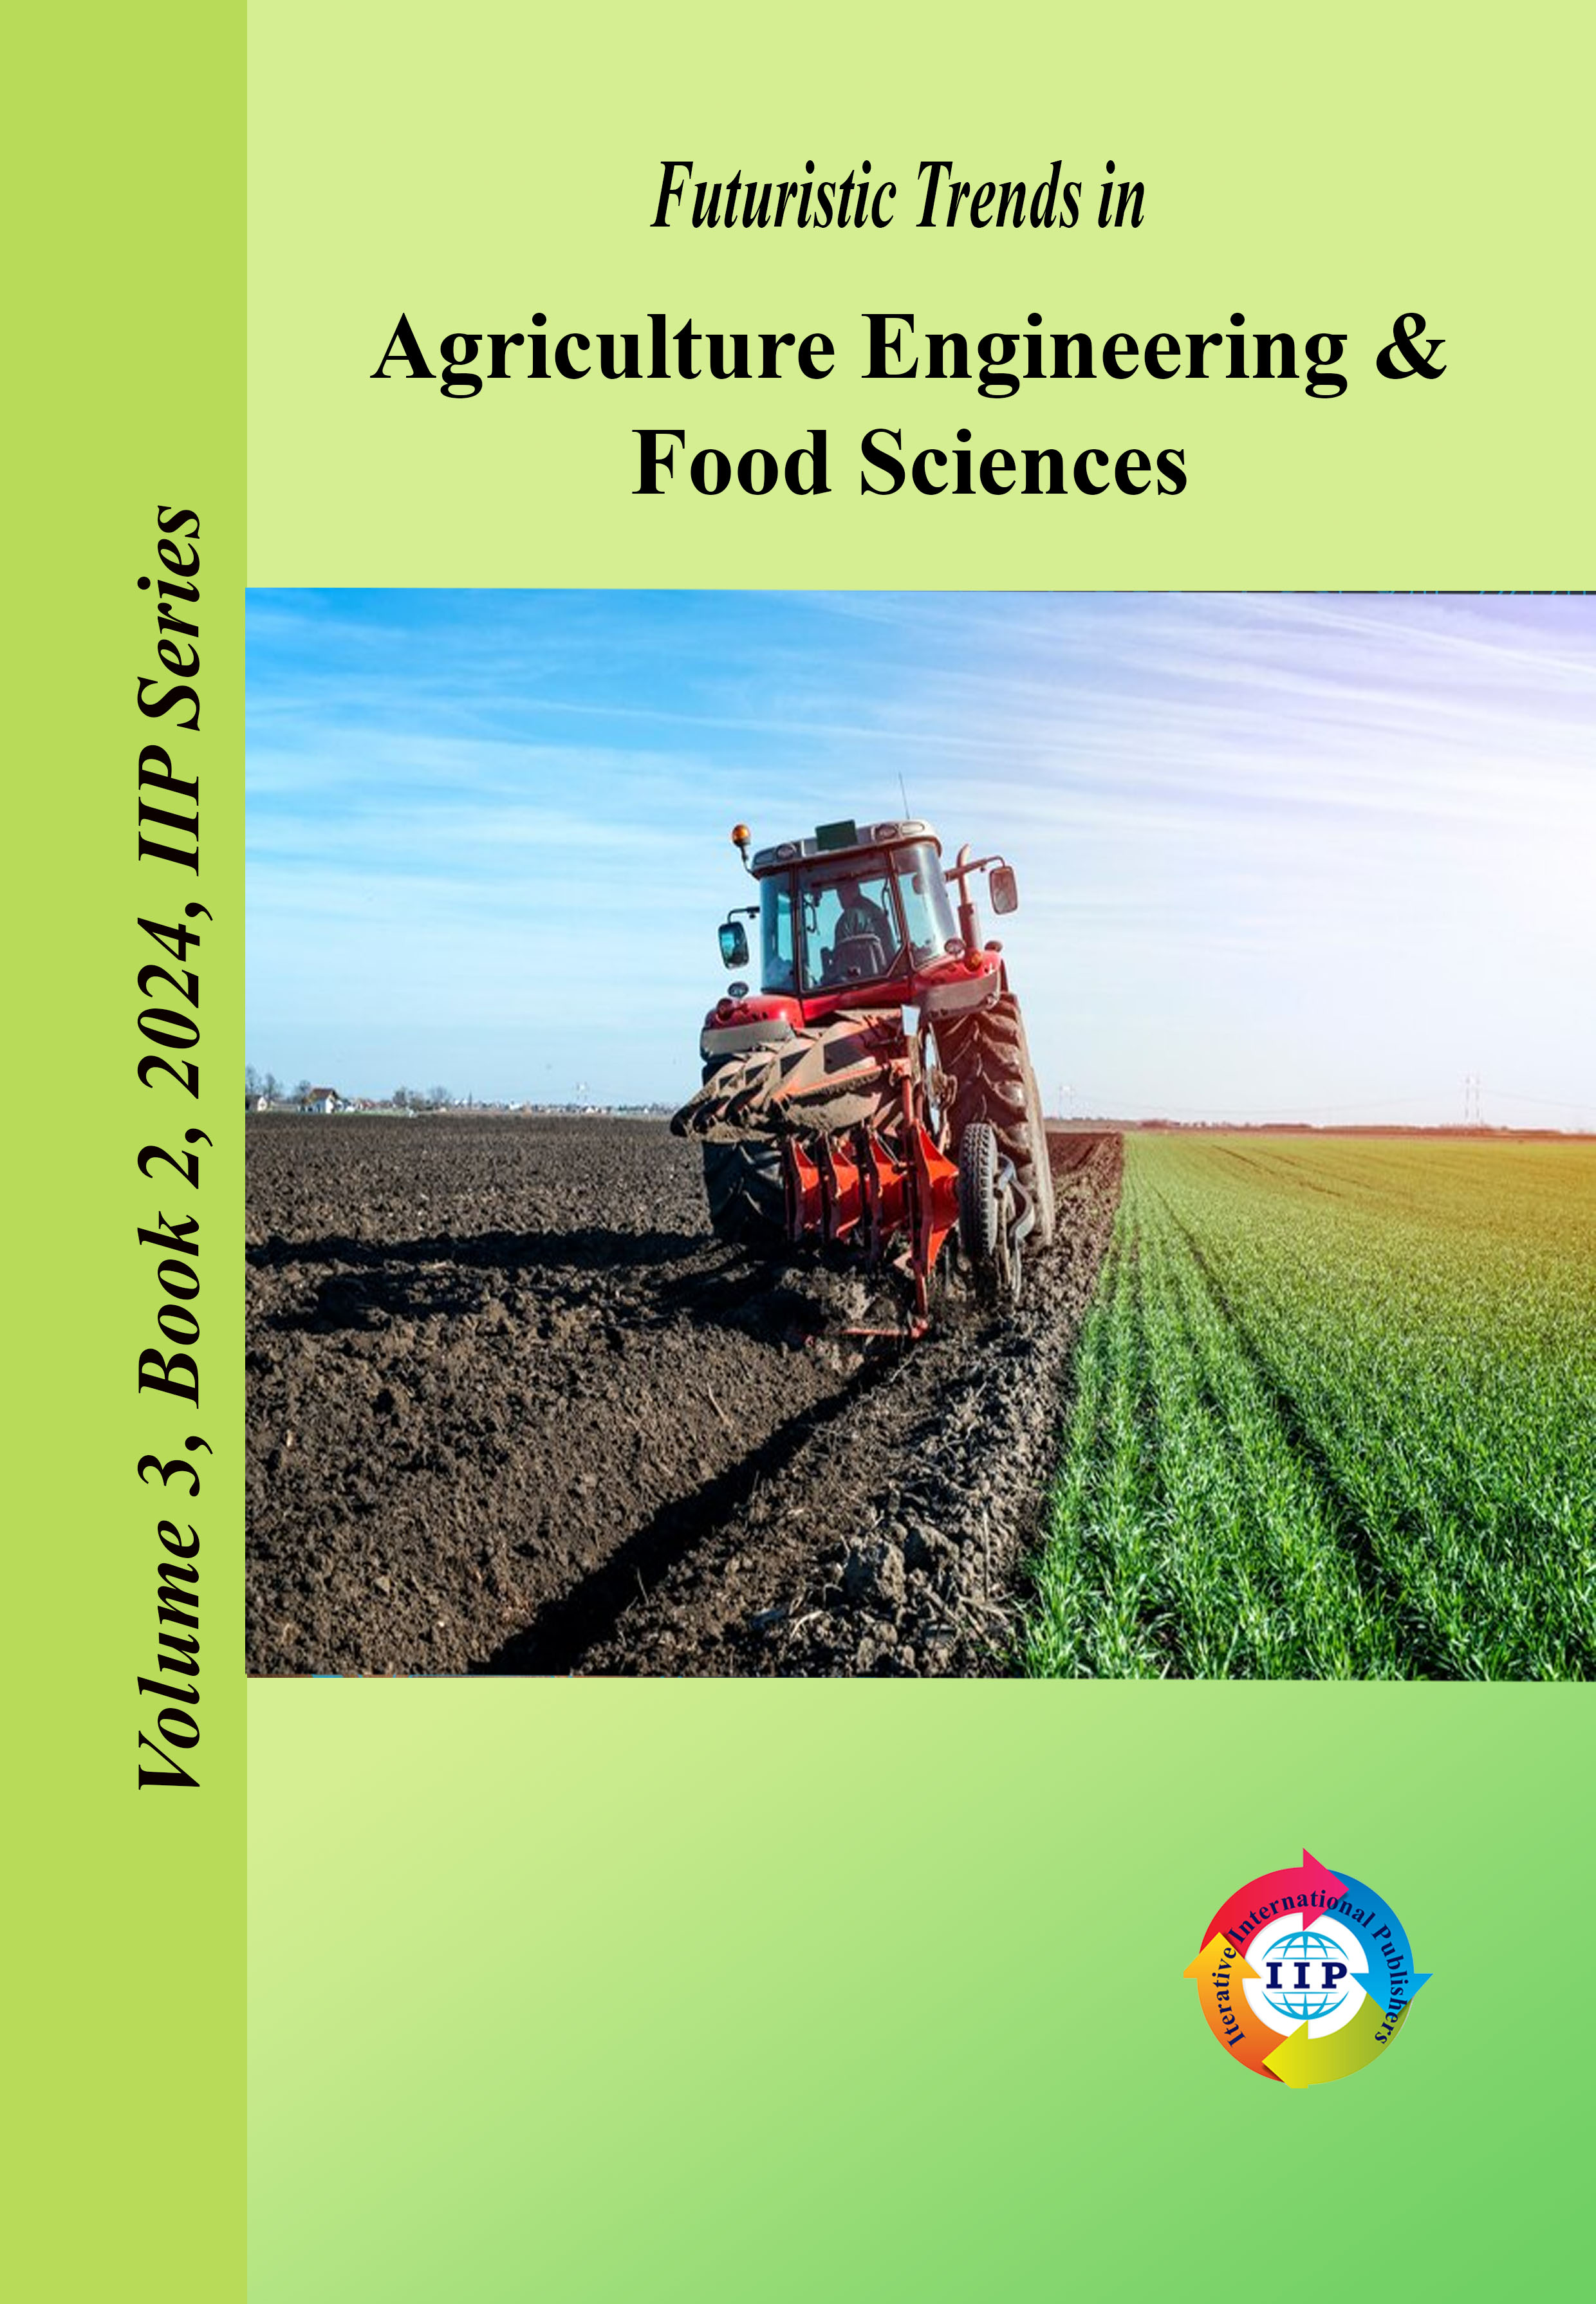 Futuristic Trends in Agriculture Engineering & Food Sciences Volume 3 Book 2